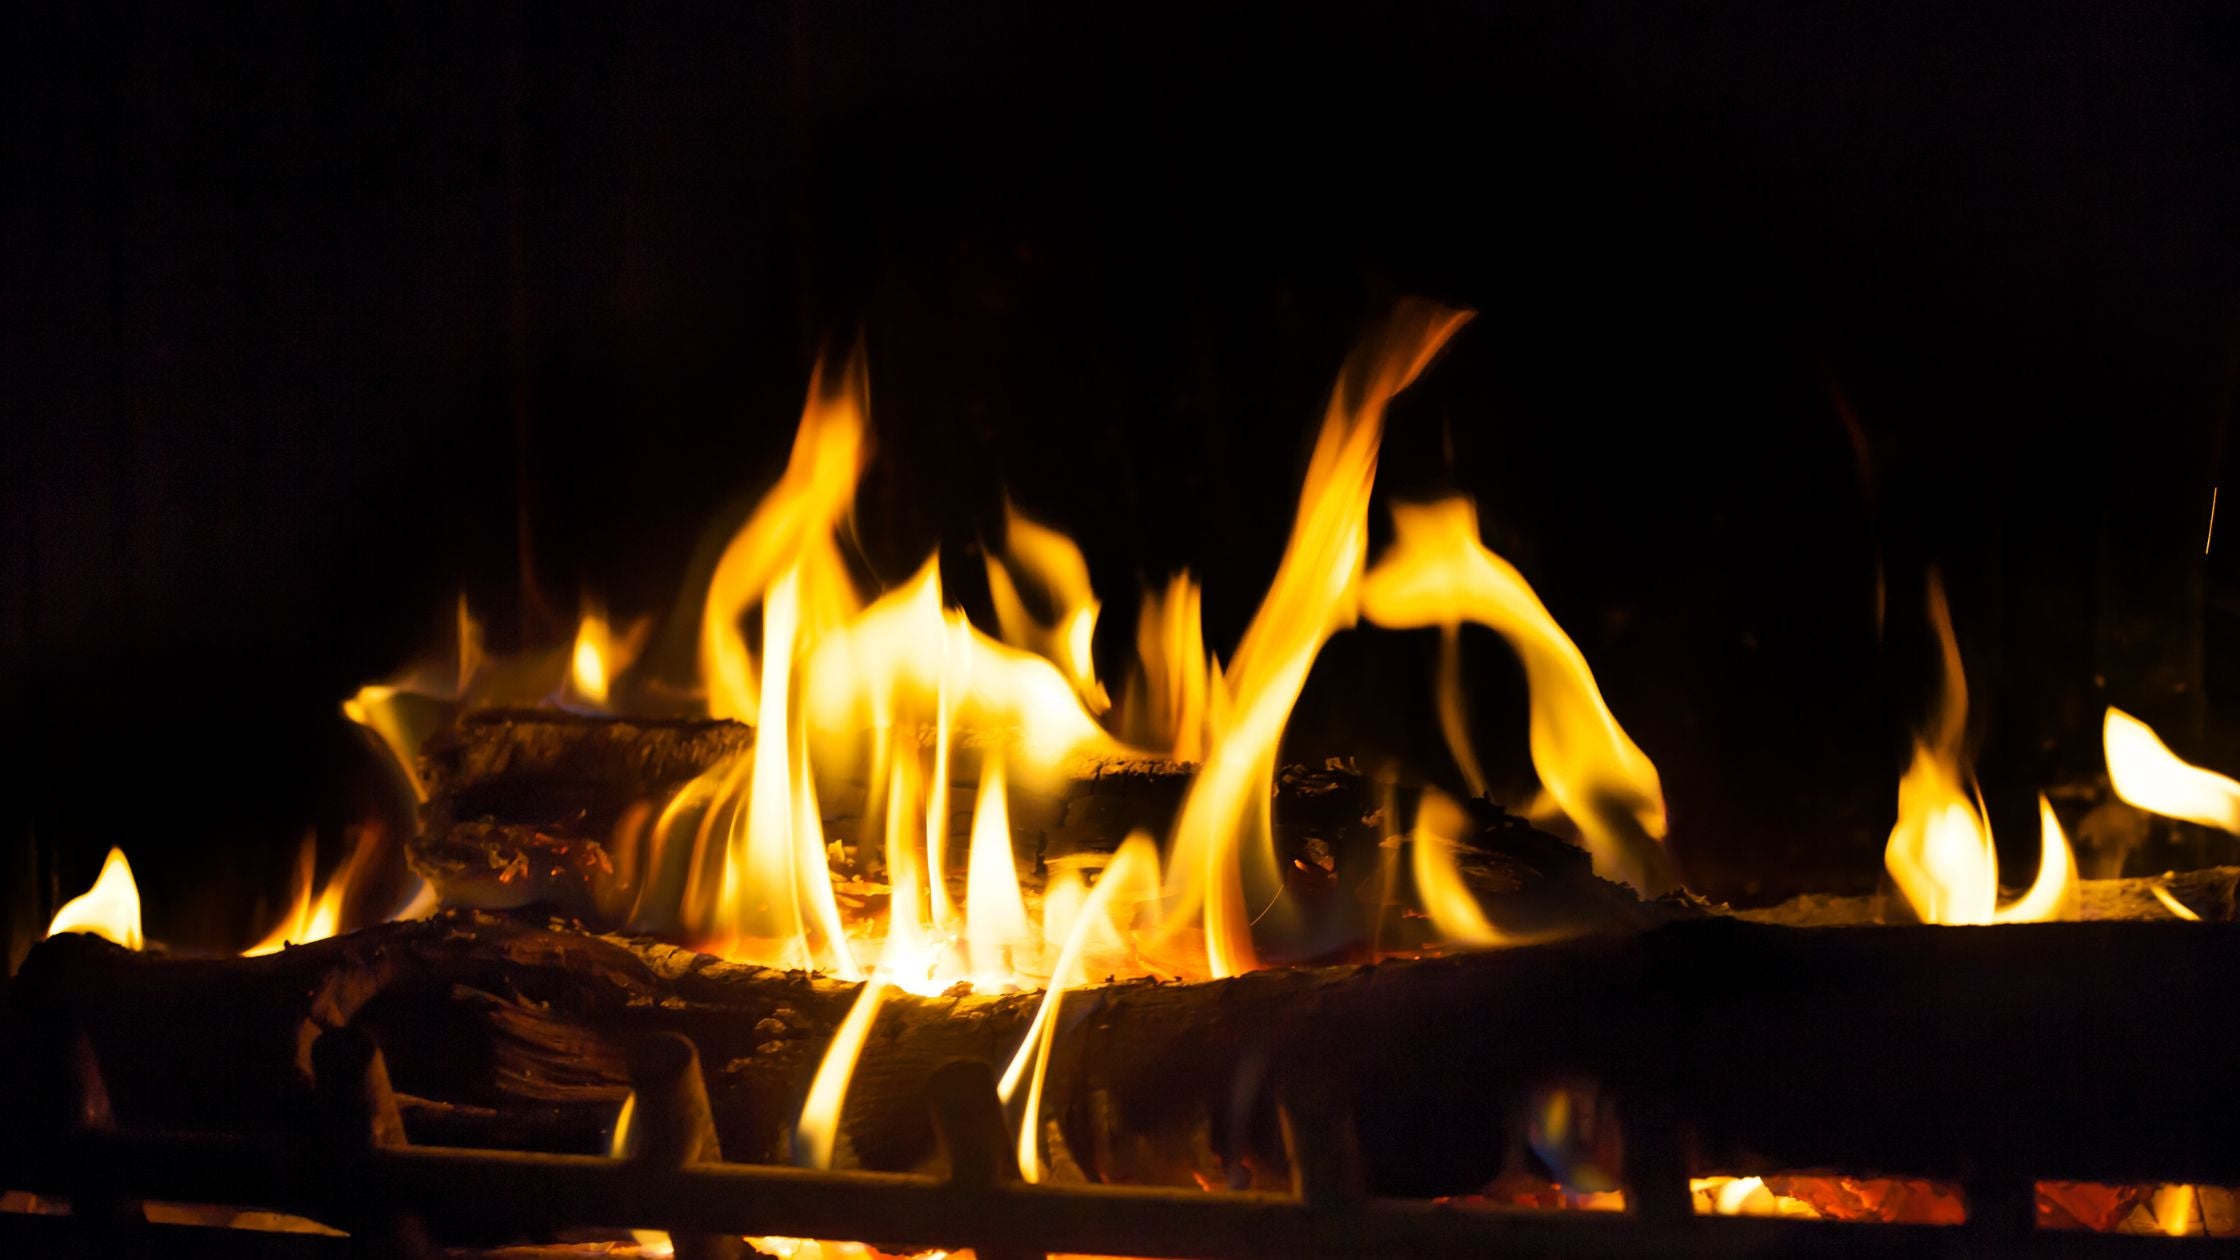 What are the main benefits that come from using Homefire Heat Logs?